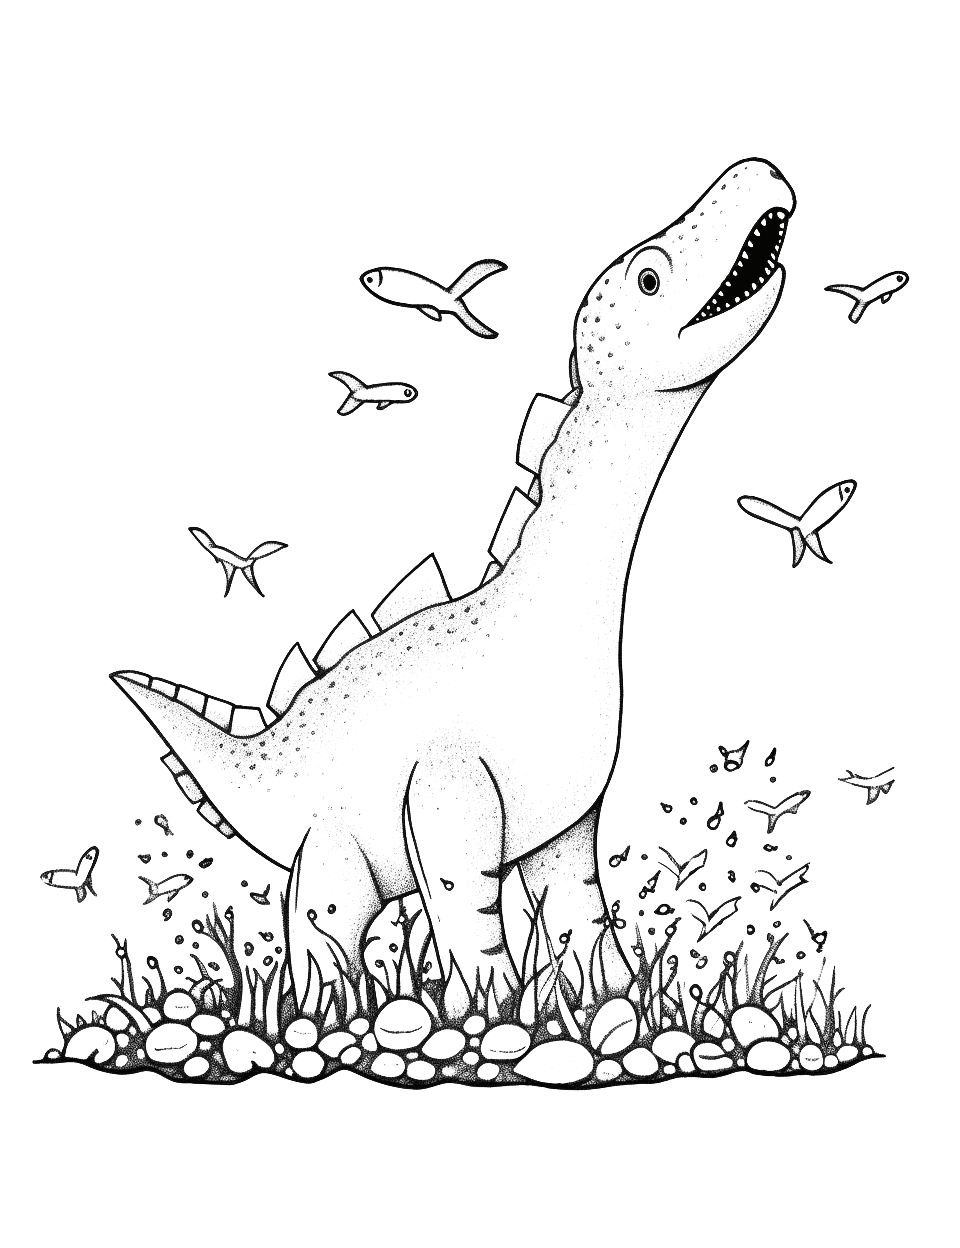 Mosasaurus Feeding Time Dinosaur Coloring Page - The gigantic Mosasaurus leaping out of the water to catch its prey.